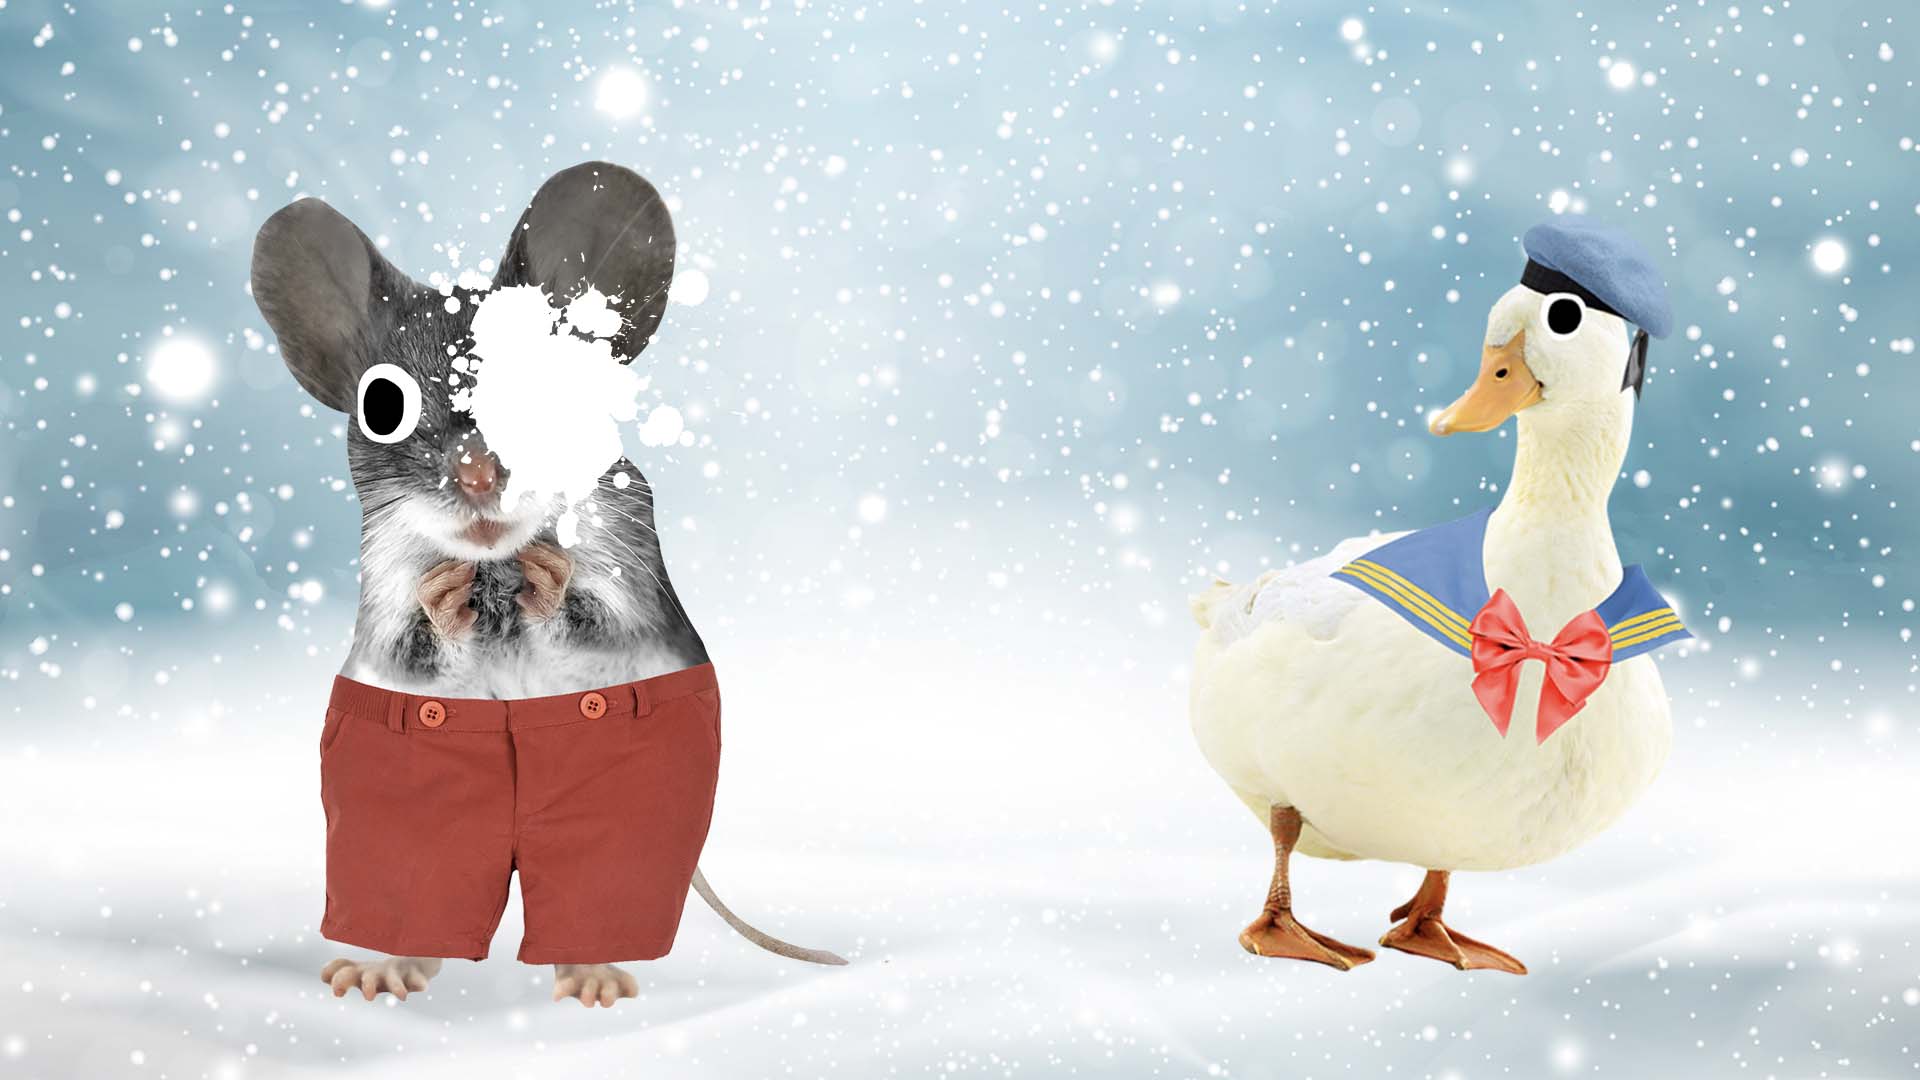 A mouse and a duck in the snow